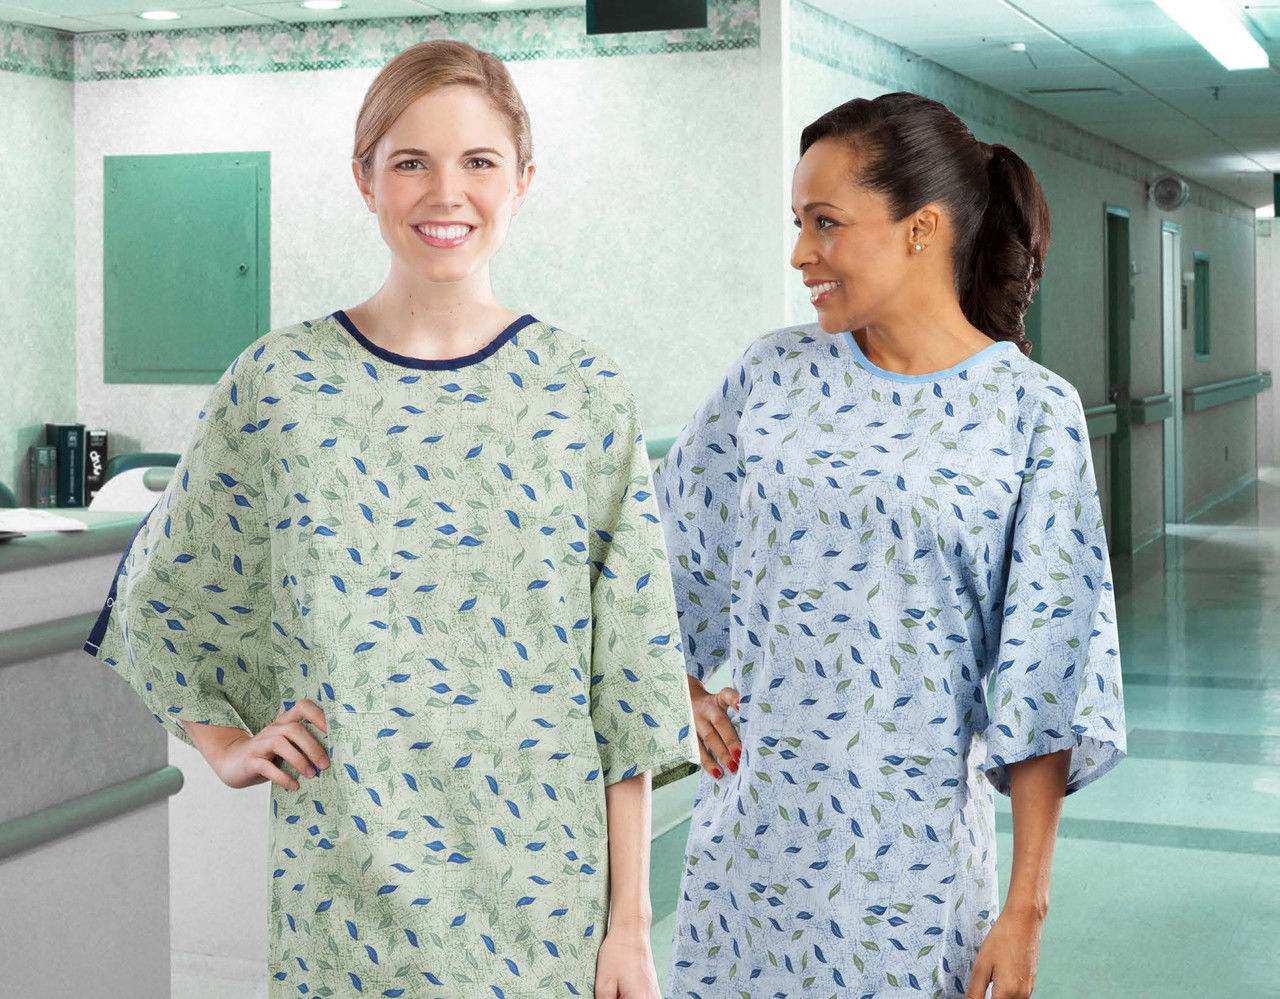 Do the polyester patient gowns by American Dawn (ADI) have any special features?